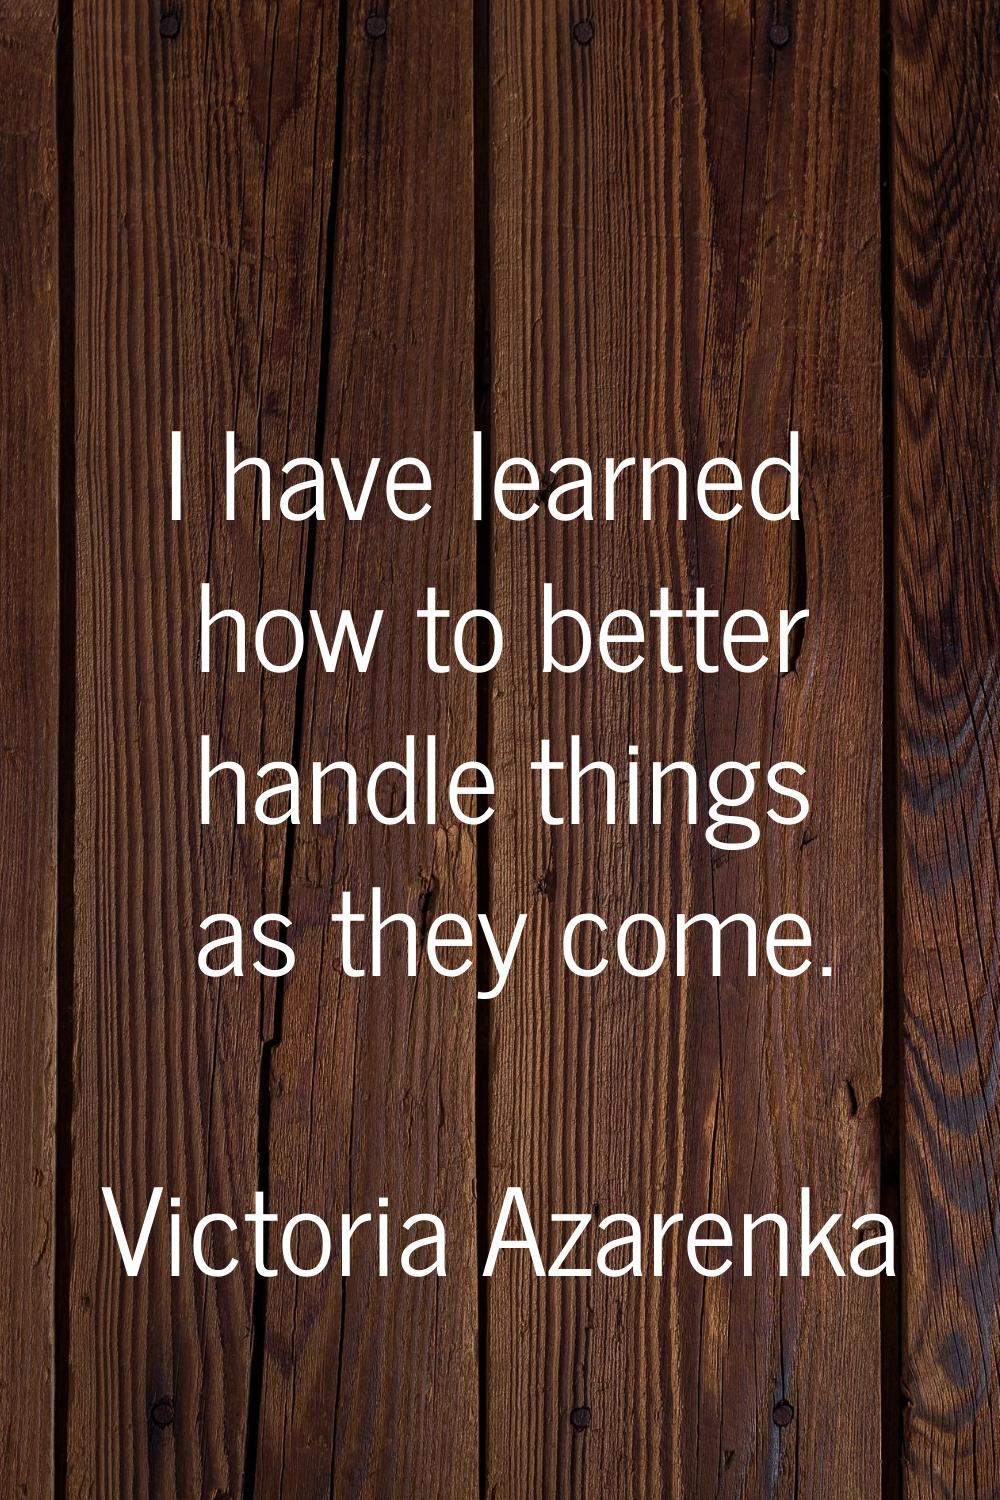 I have learned how to better handle things as they come.